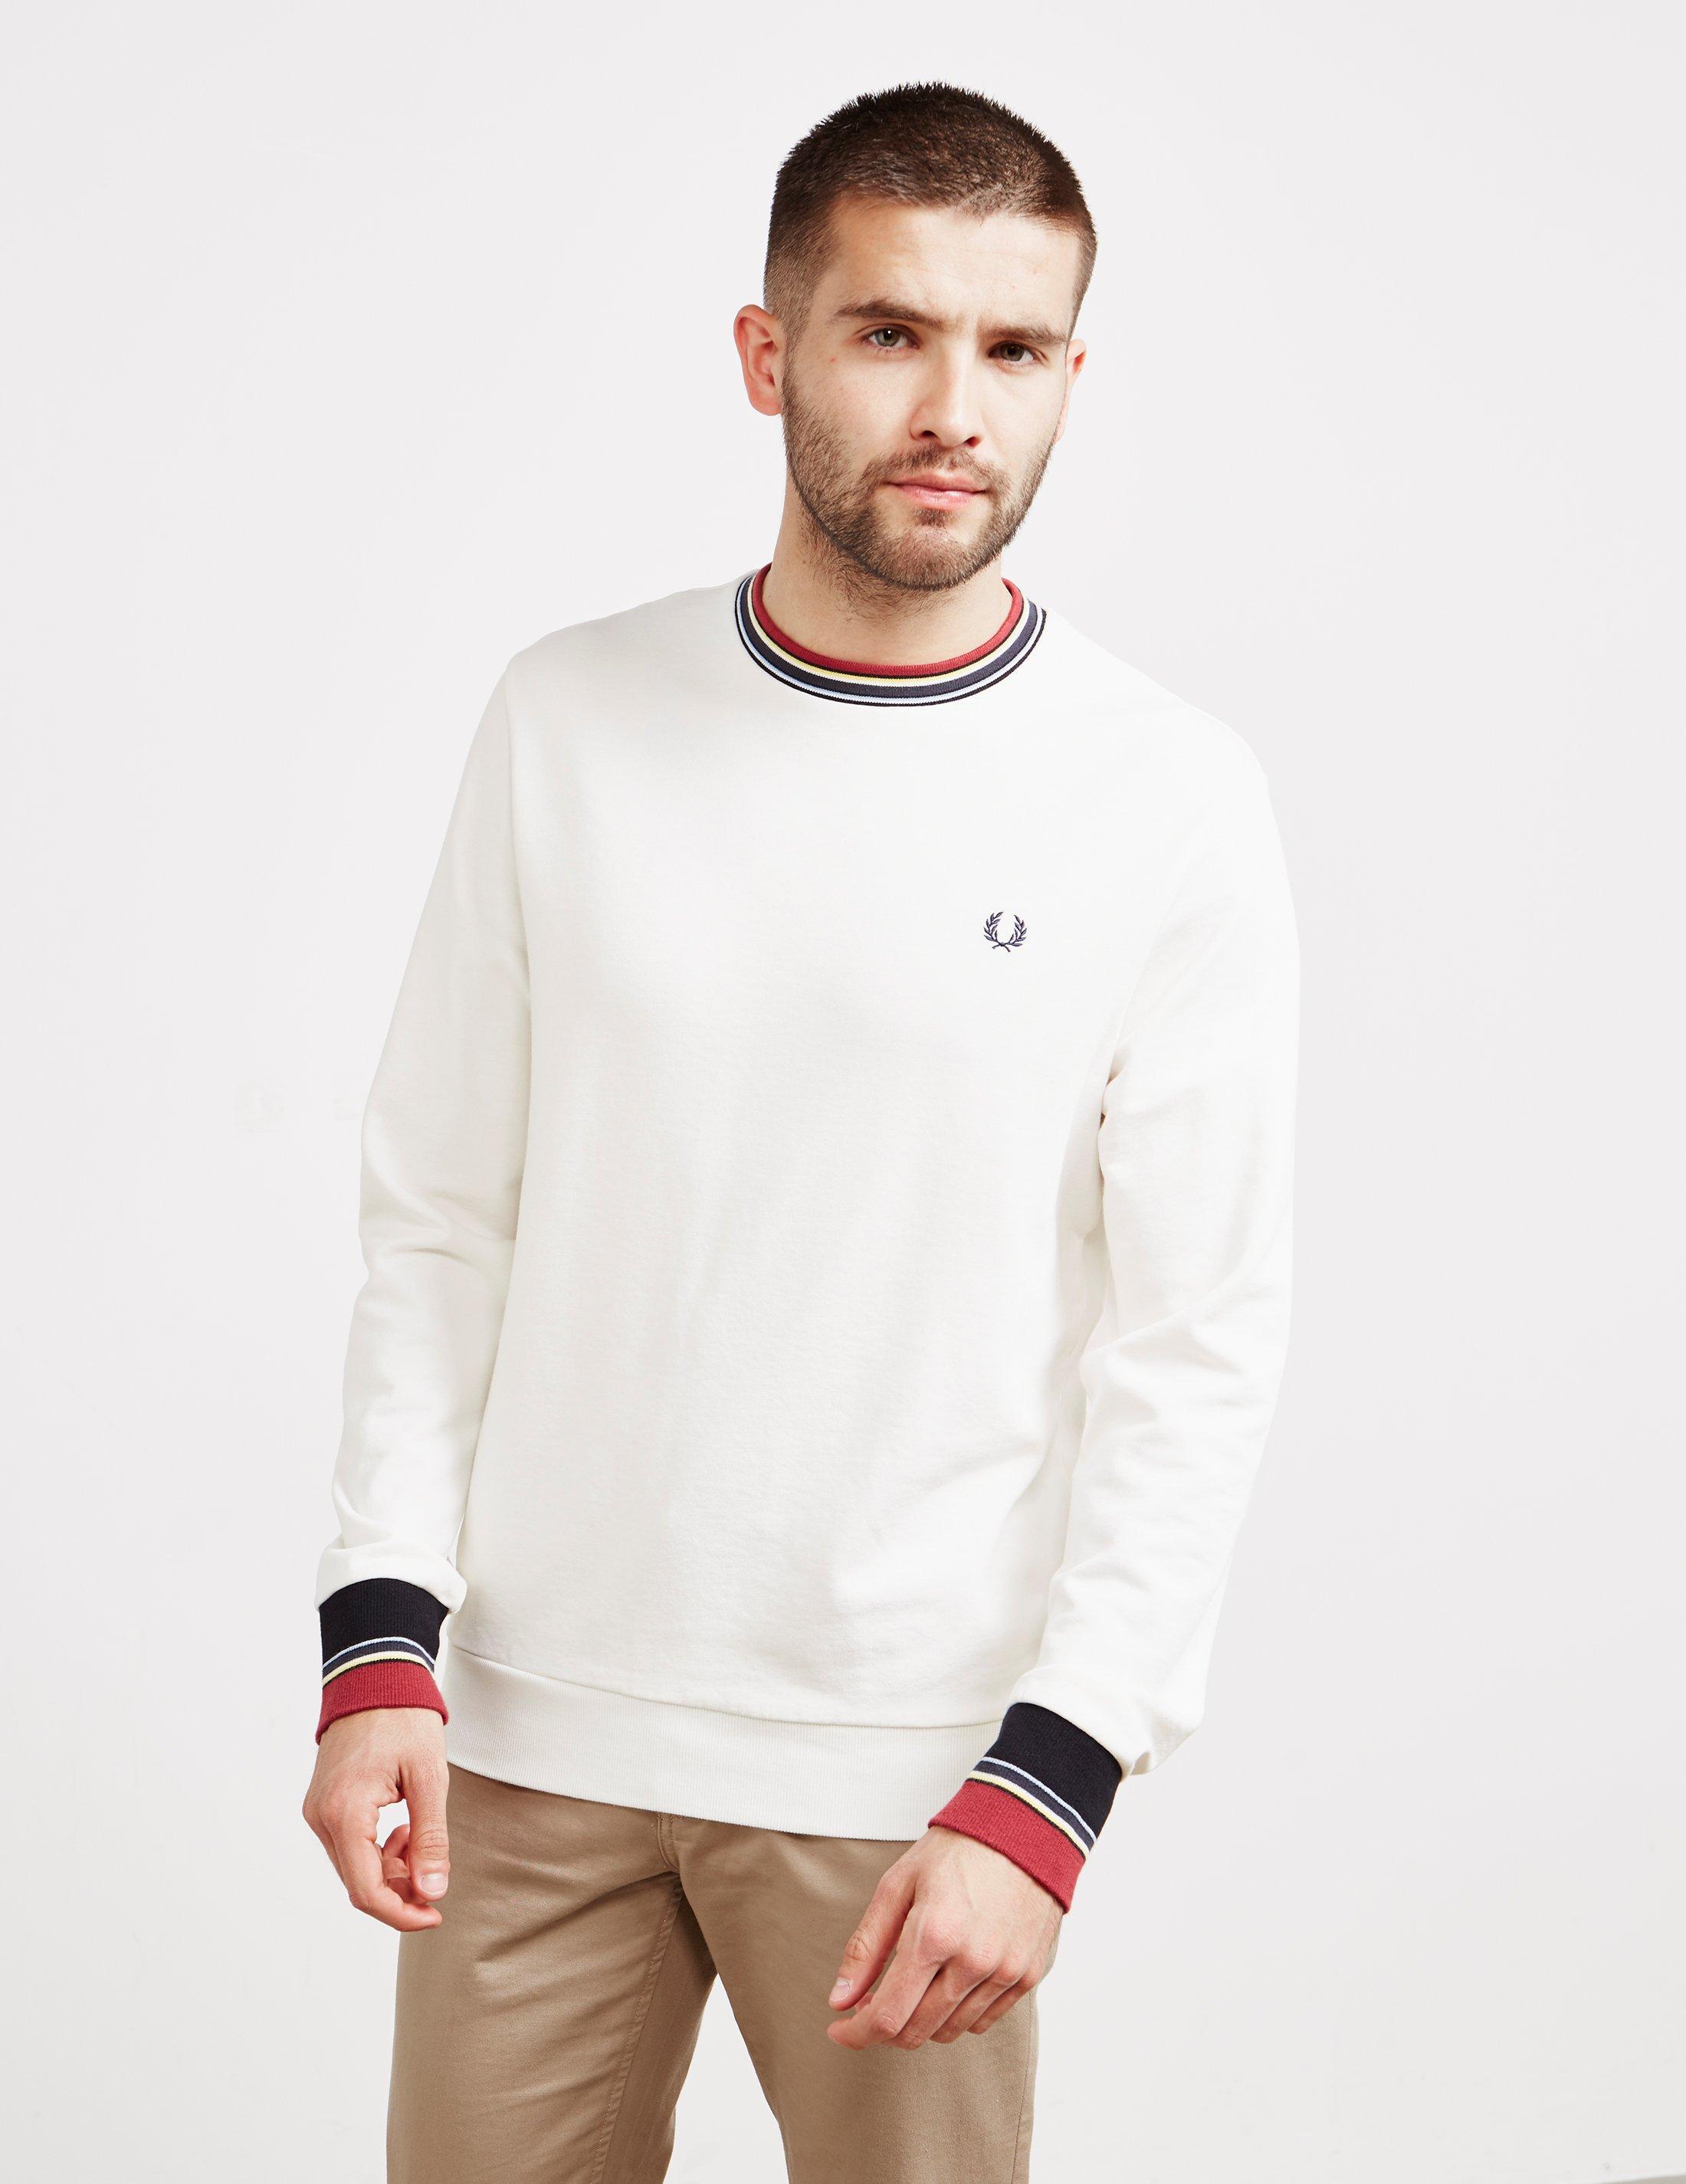 Fred Perry Striped Trim Sweatshirt White in White for Men - Lyst